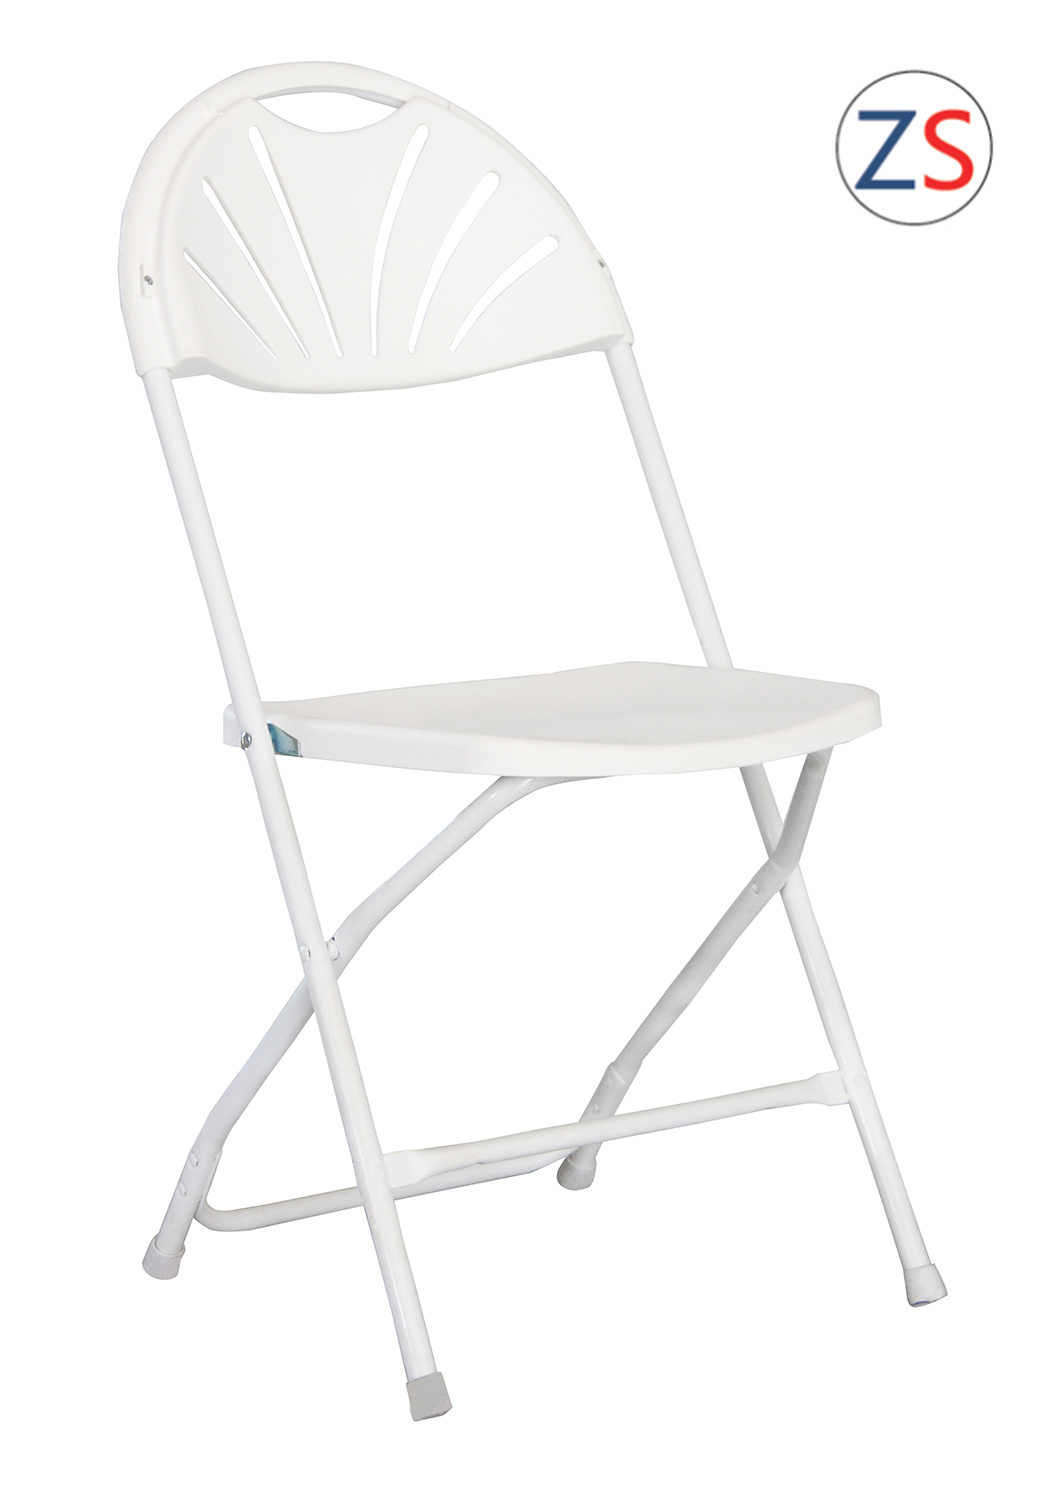 Hot Sell! Simple Plastic Metal Garden Home Chair